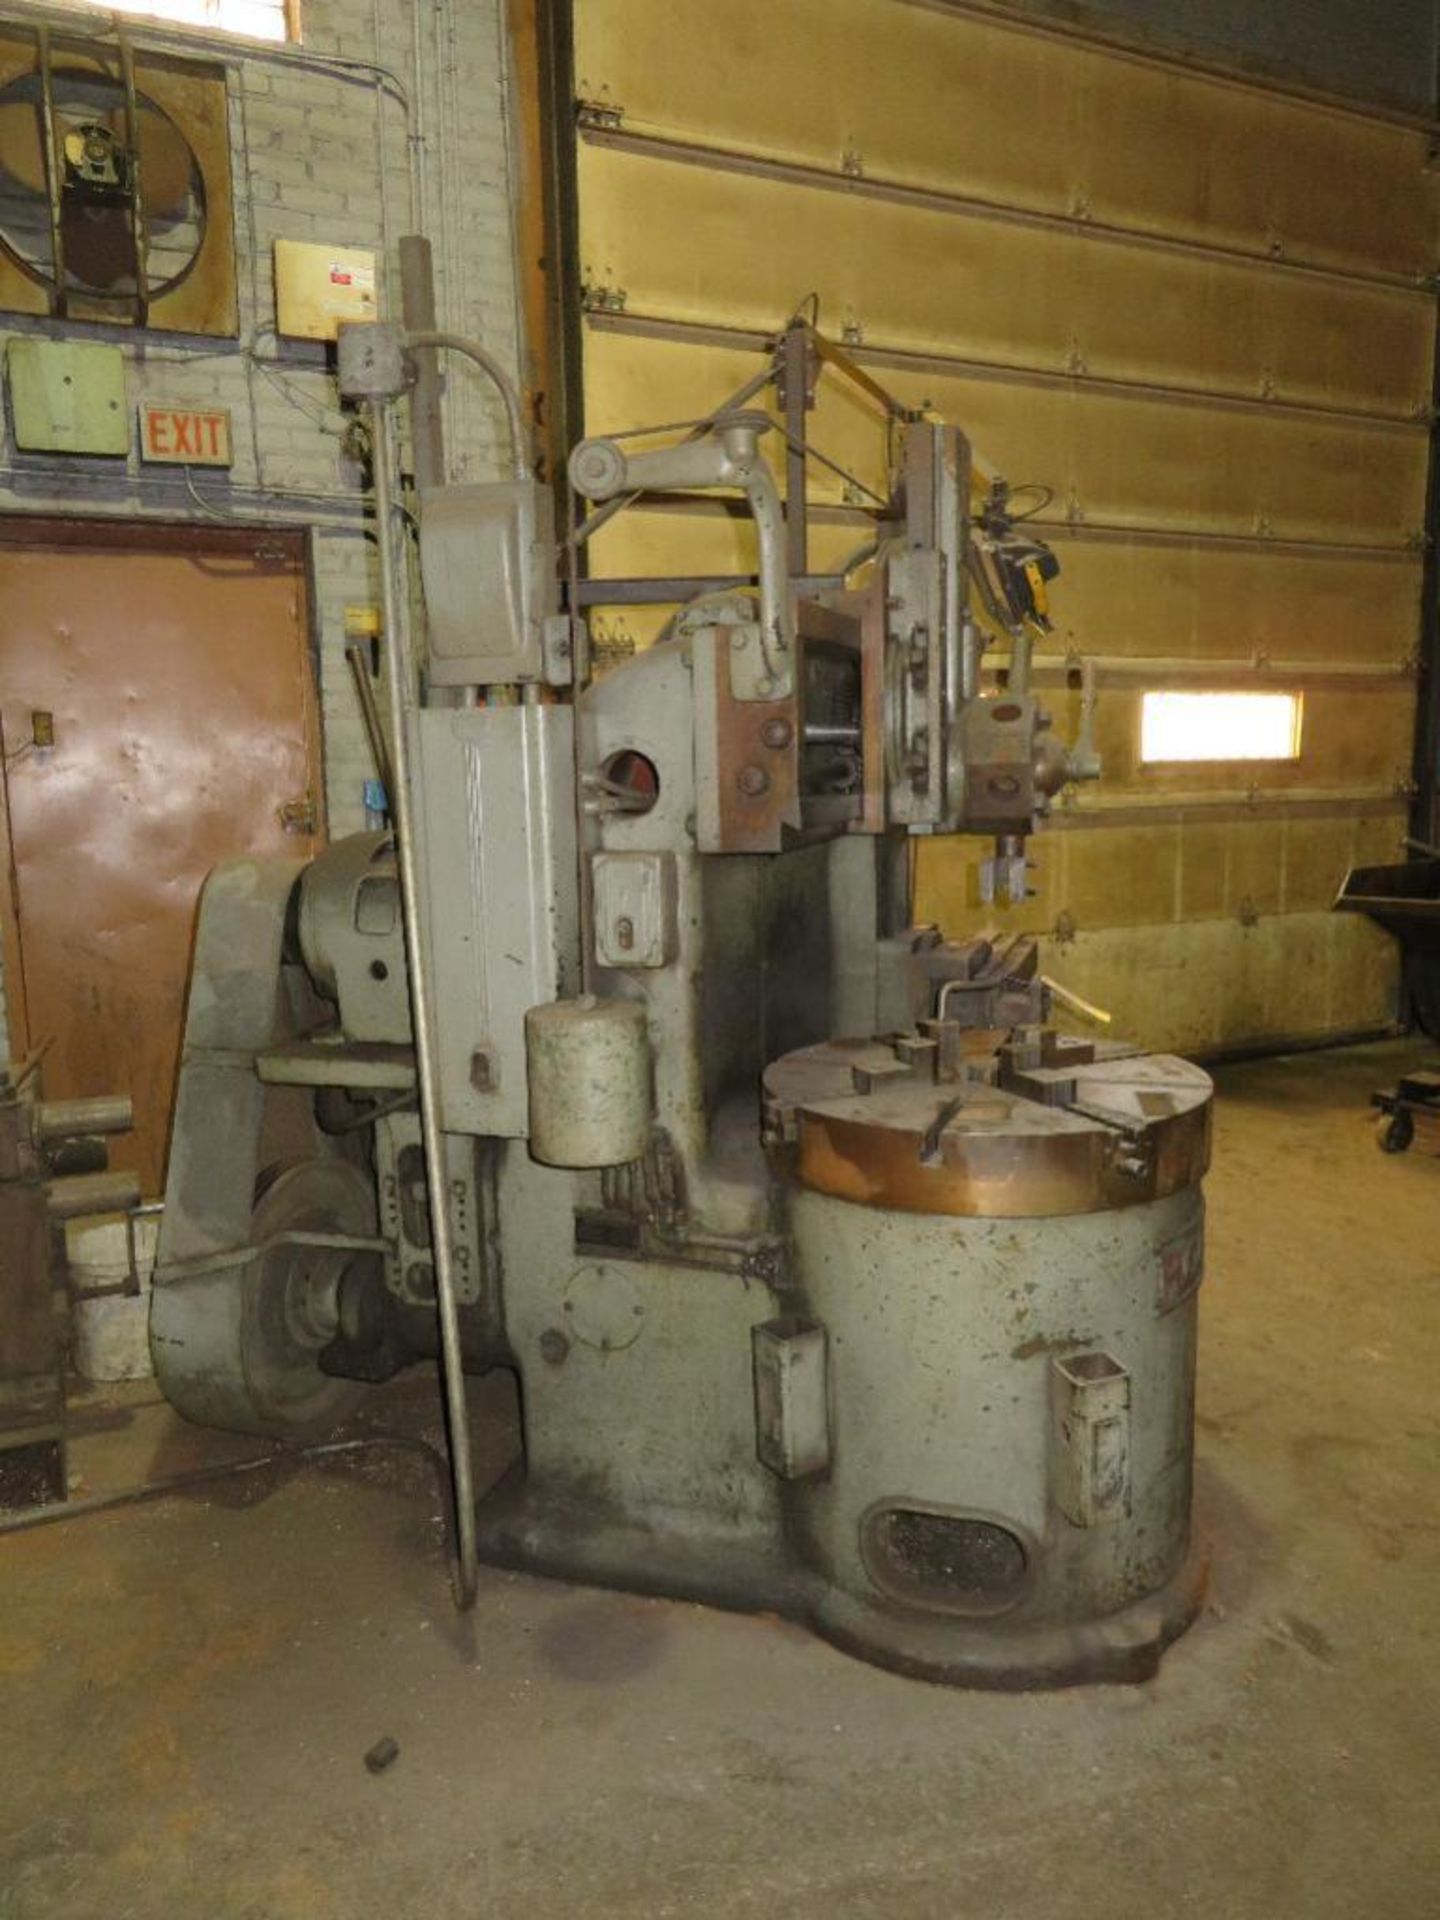 Rogers 36 in. Vertical Turret Lathe Model TT36, S/N 1330, 36 in. 4-Jaw Chuck, 5 Position Turret, Rig - Image 2 of 2